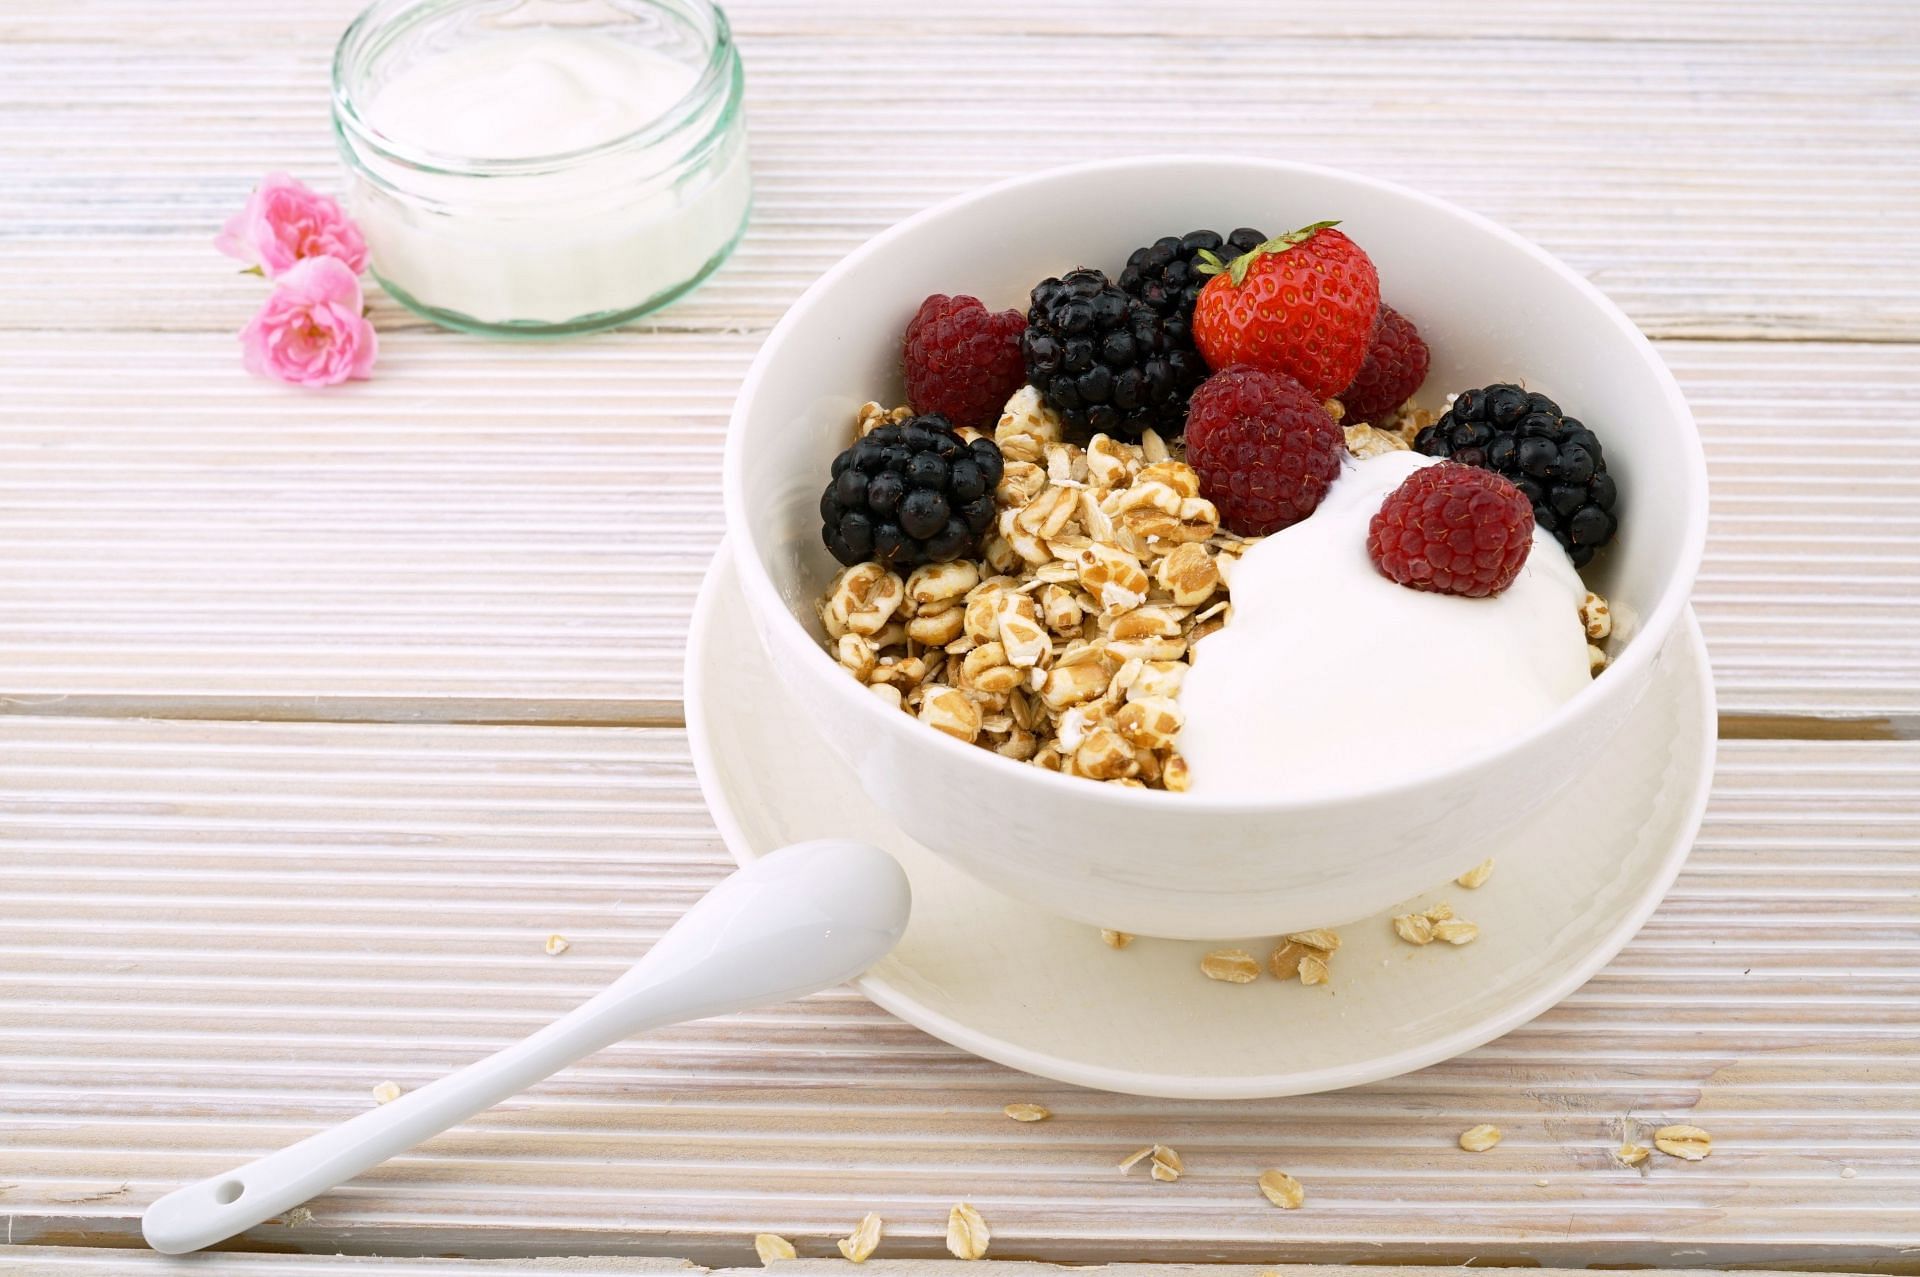 Greek yogurt with berries is a nutritious and delicious snack (Image Via Pexels)